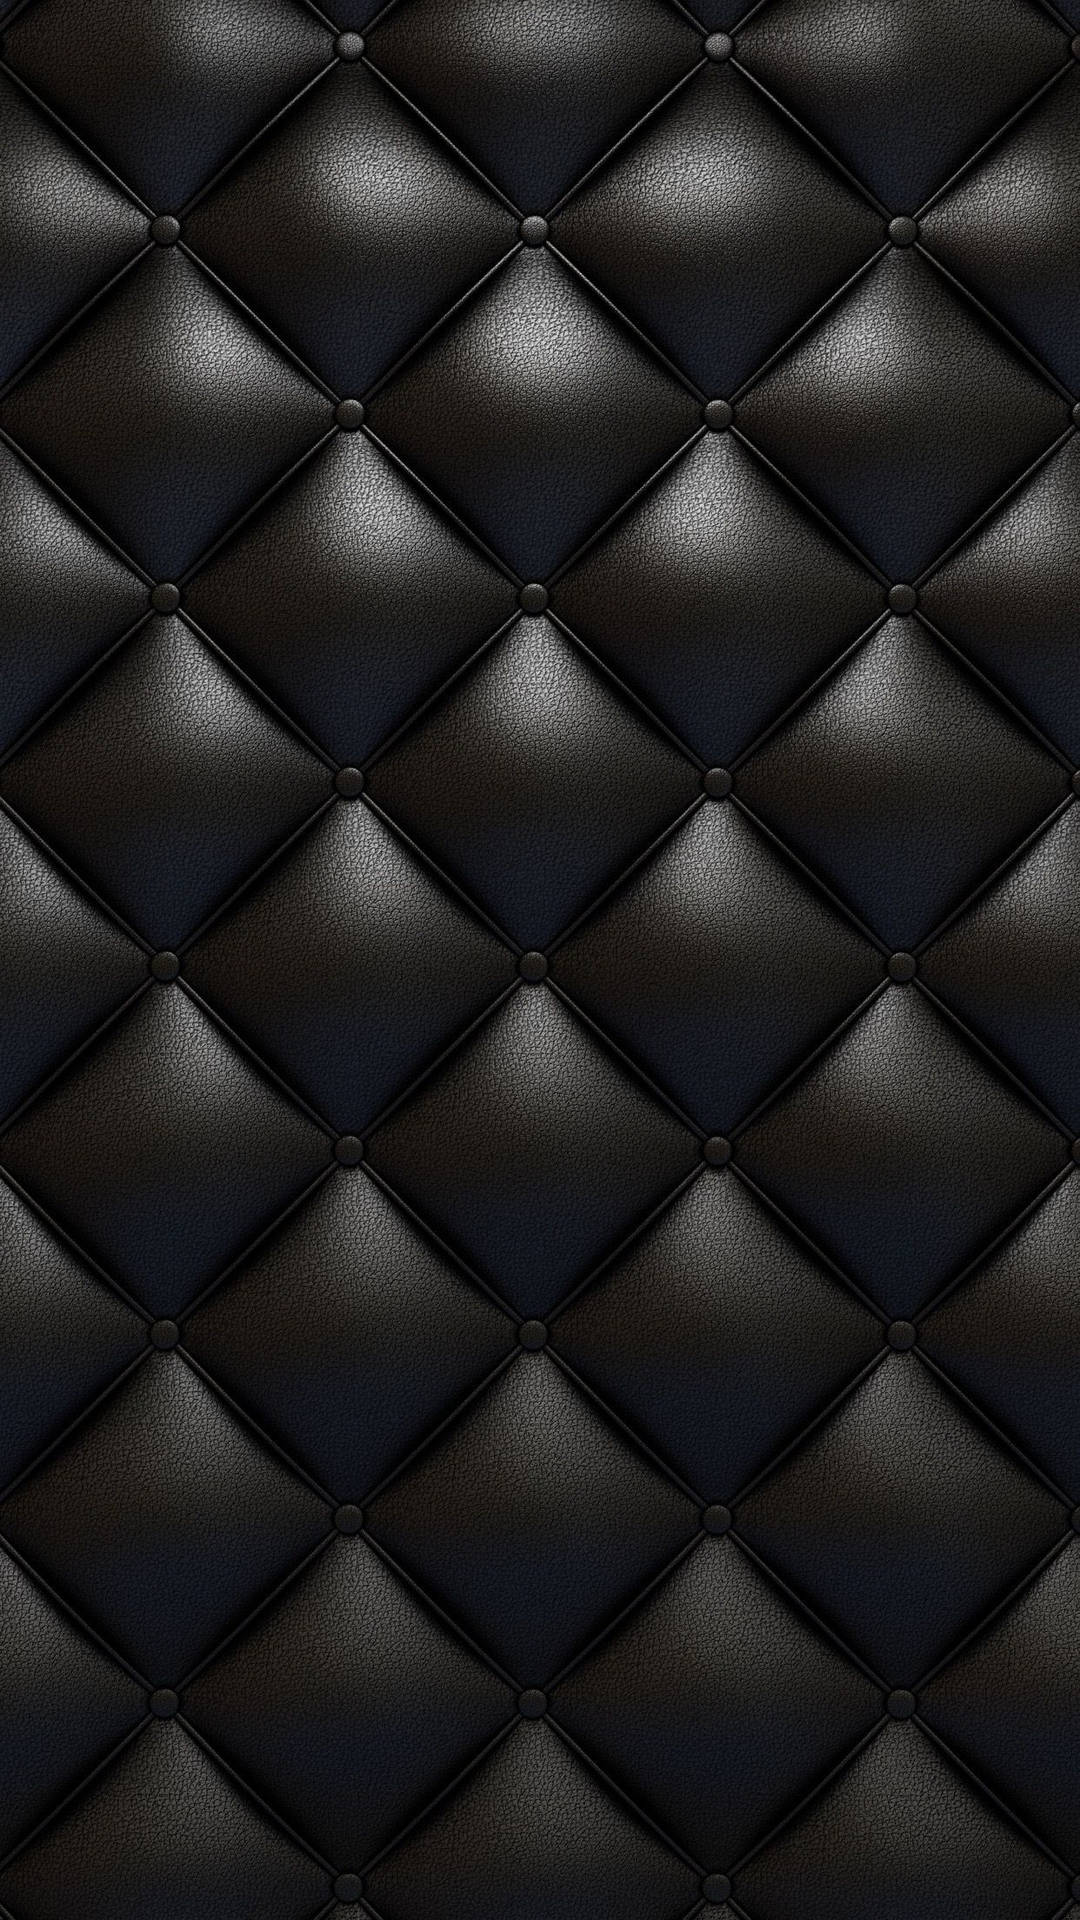 Upholstery In Black Leather Iphone Wallpaper